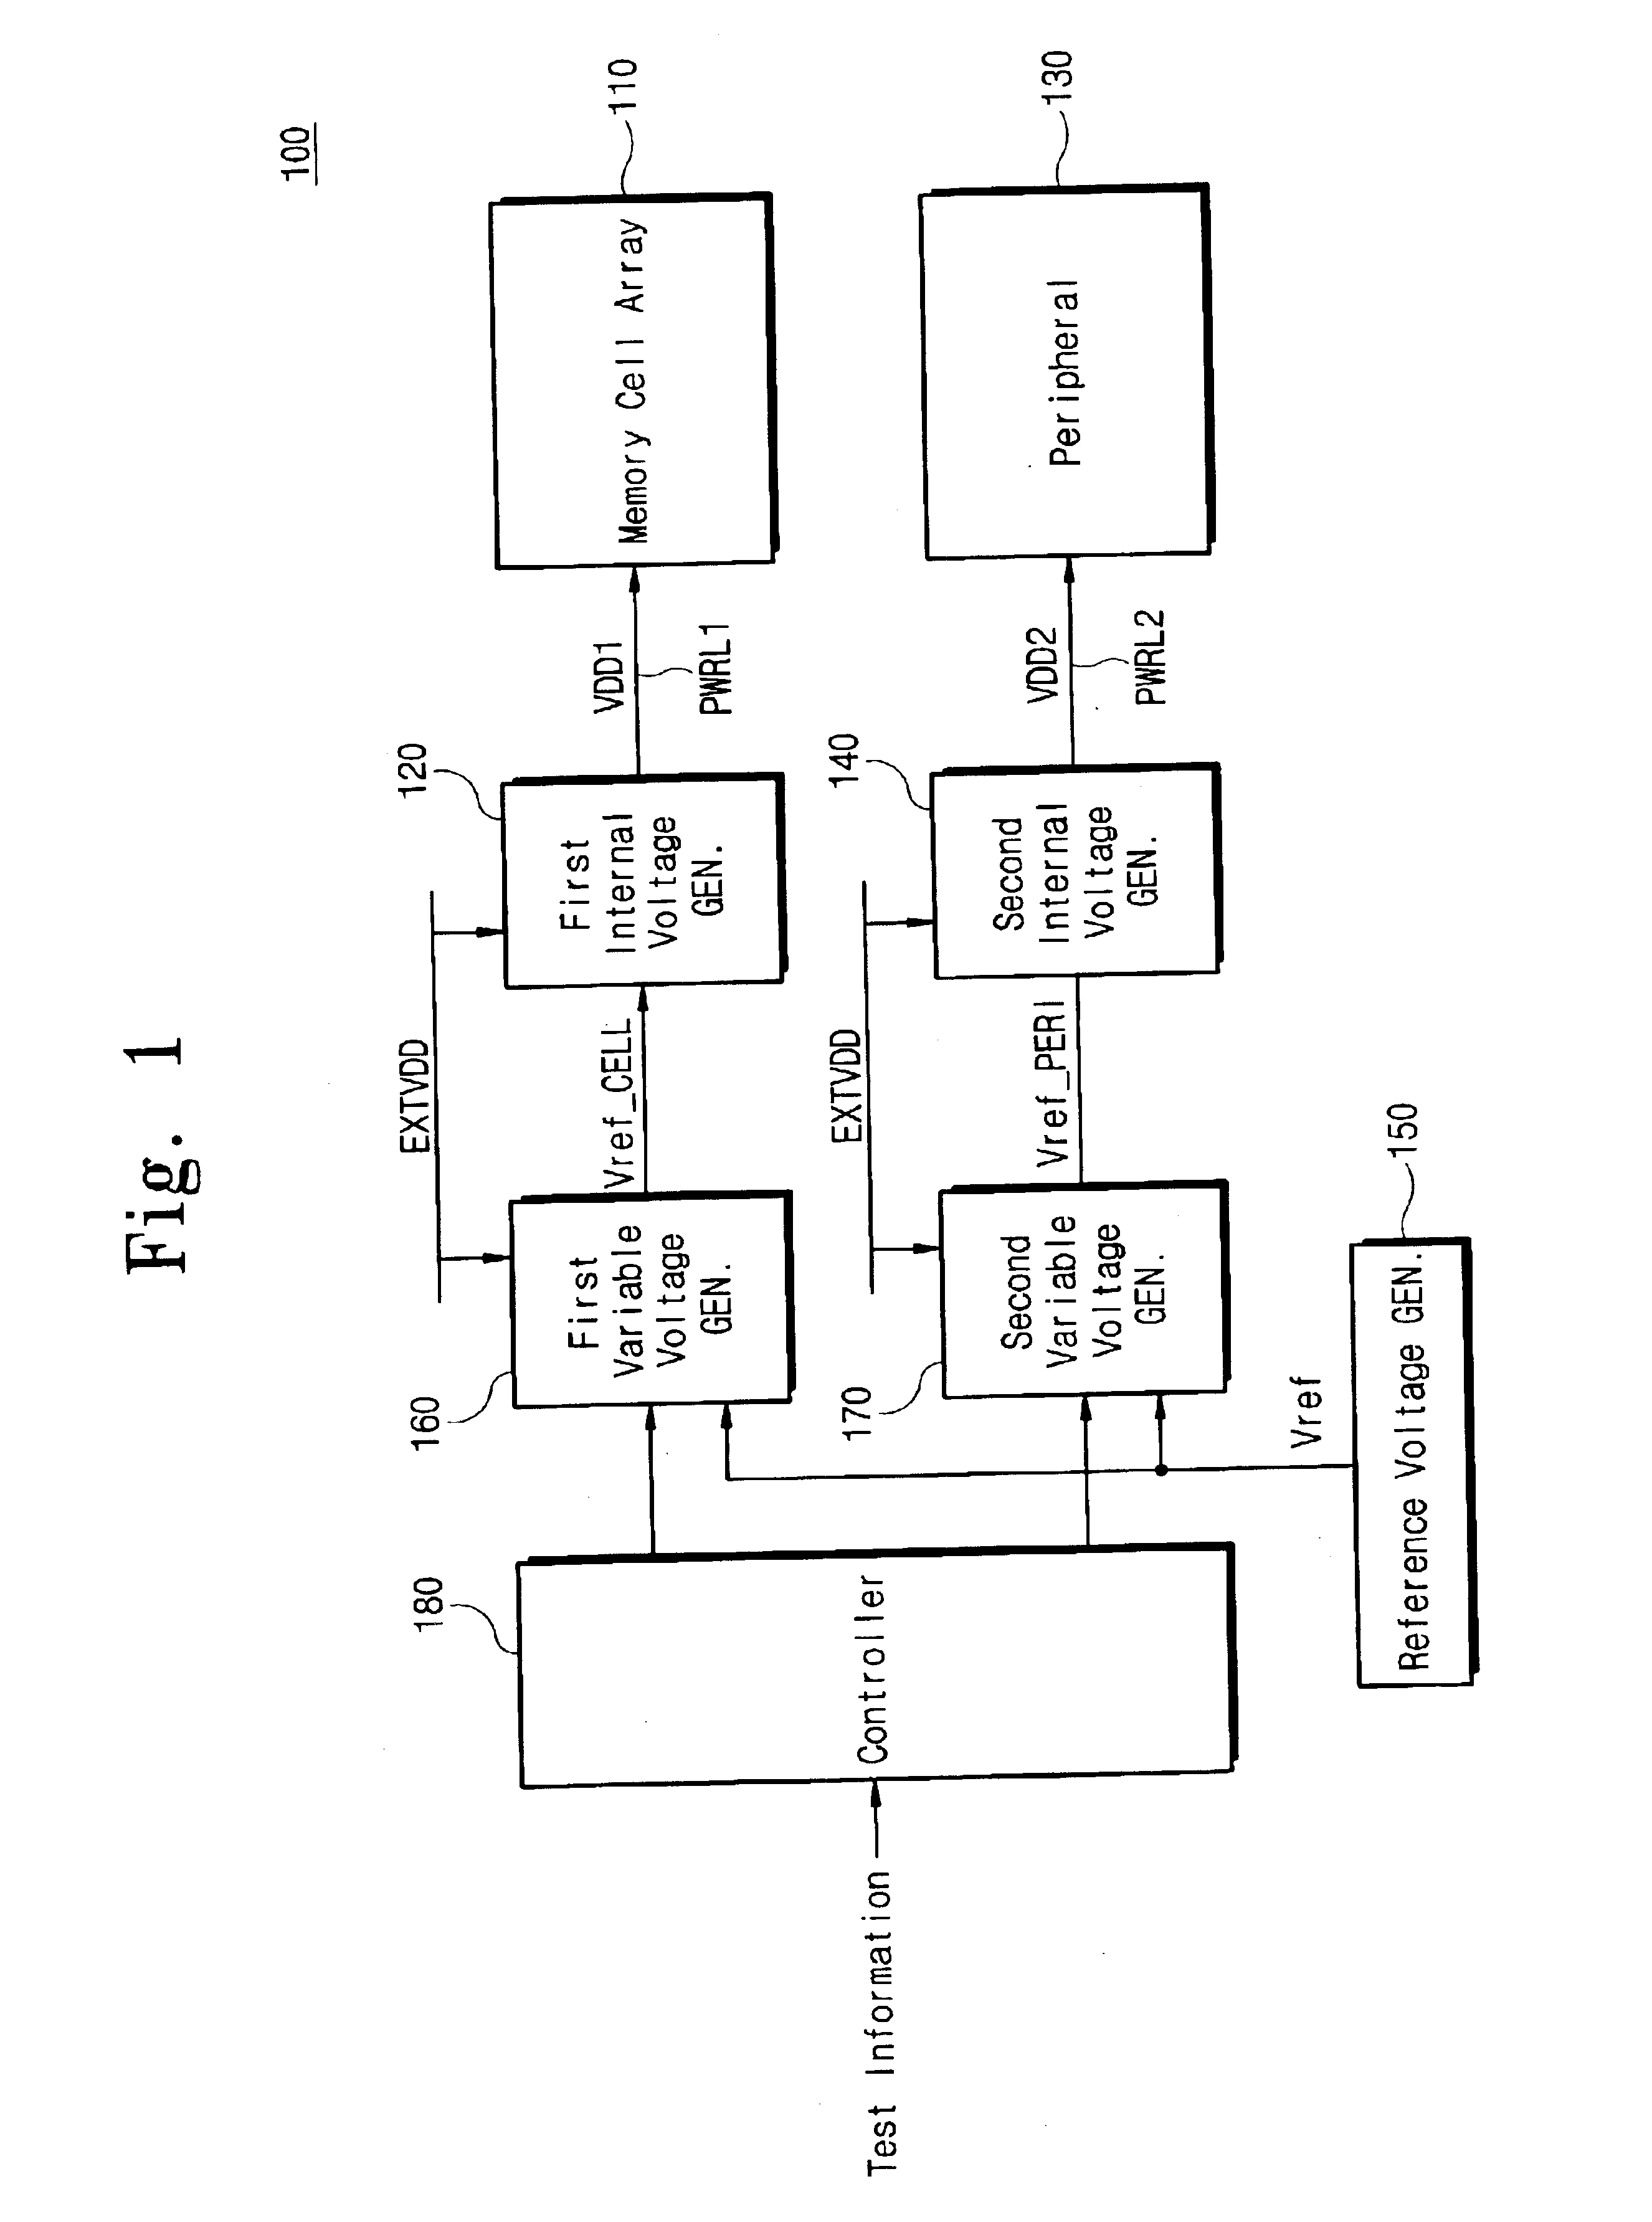 Semiconductor memory device with internal voltage generators for testing a memory array and peripheral circuits